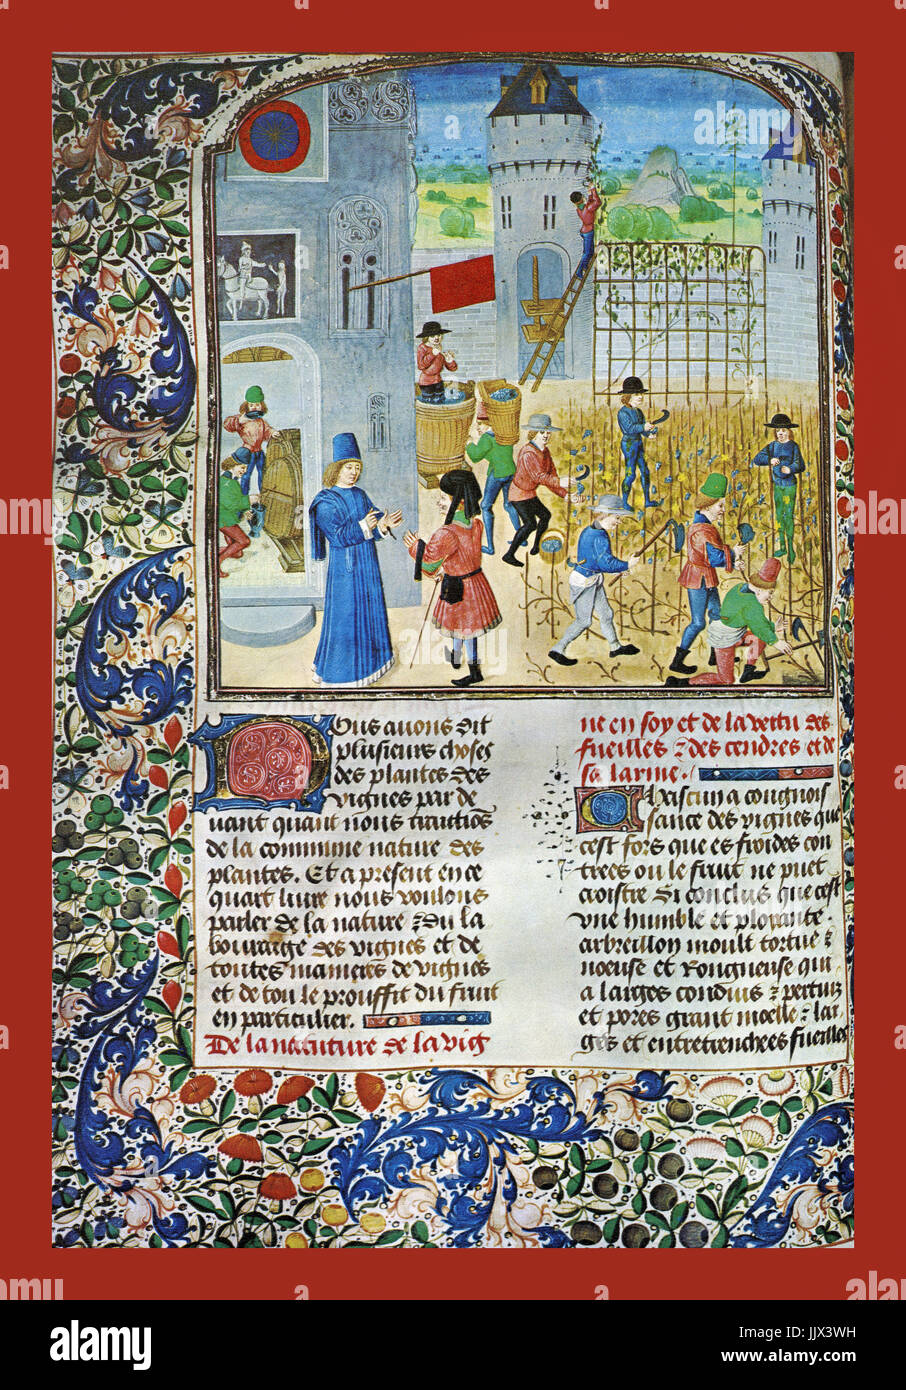 HISTORIC OLD GRAPE HARVEST / WINE PRODUCTION ILLUMINATED ILLUSTRATION DESIGN IN THE 15TH CENTURY by Pierre de Crescens 'Livre des Profits Champetres' showing the stages in vine cultivation during The Middle Ages Stock Photo